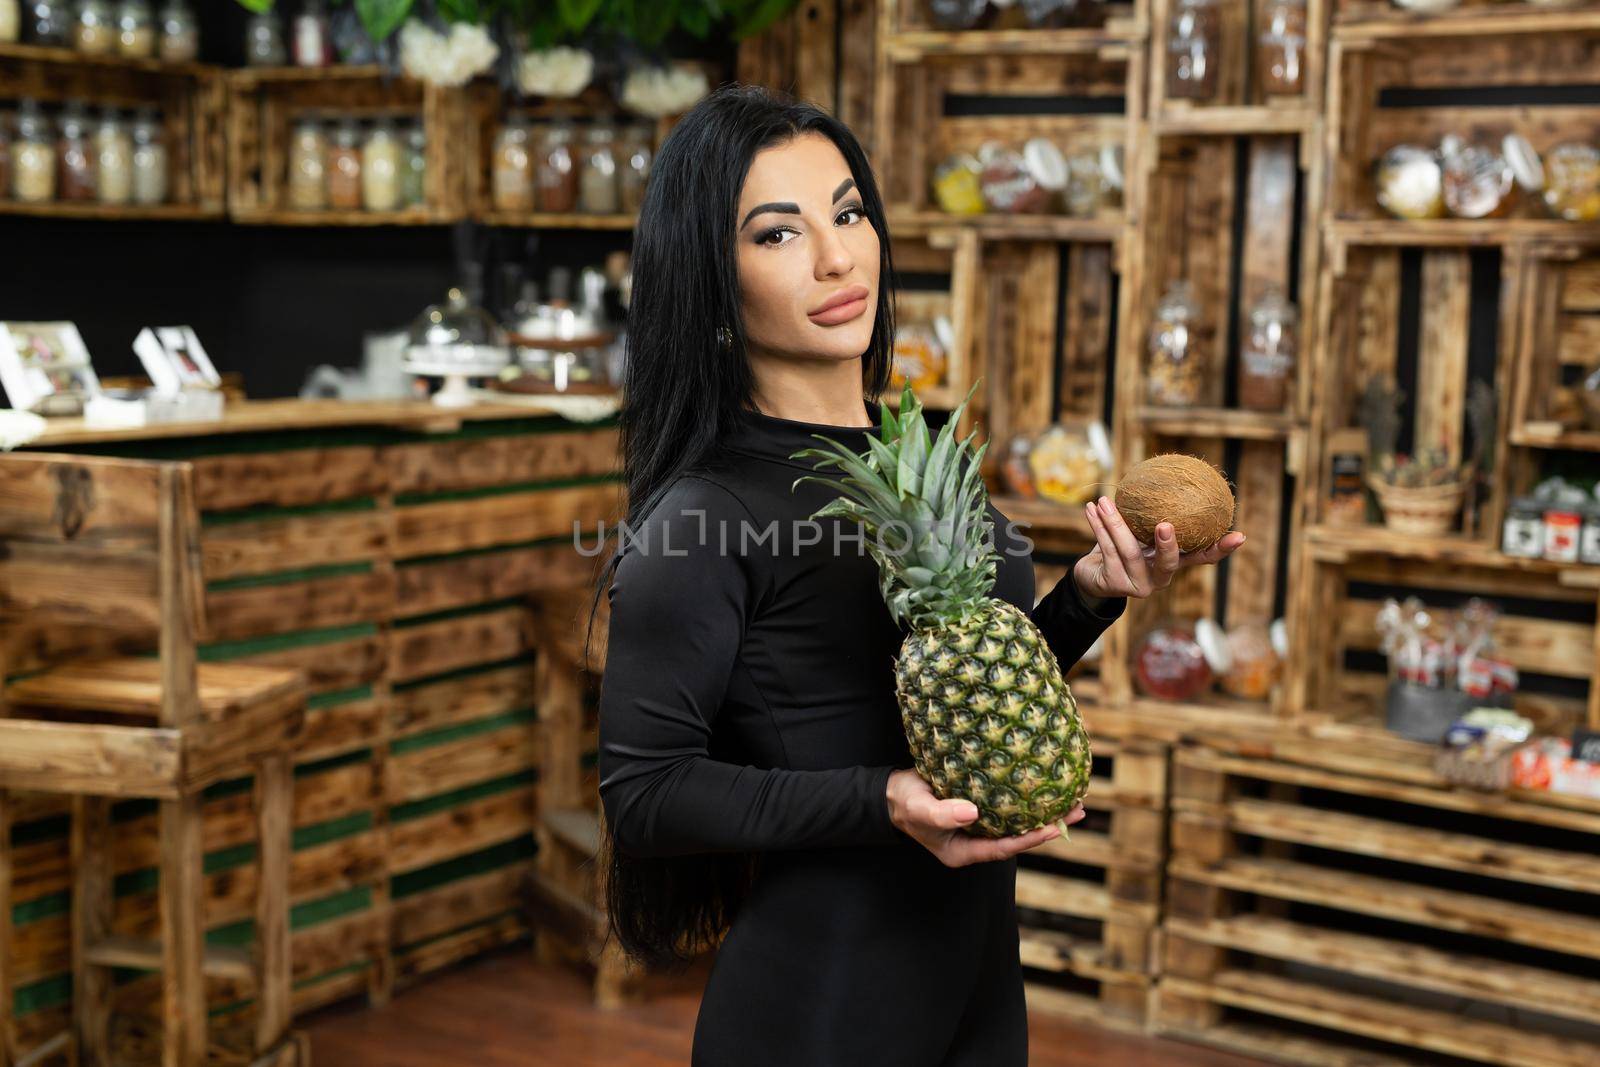 A young happy woman is holding and selling fresh fruit in a health food store.